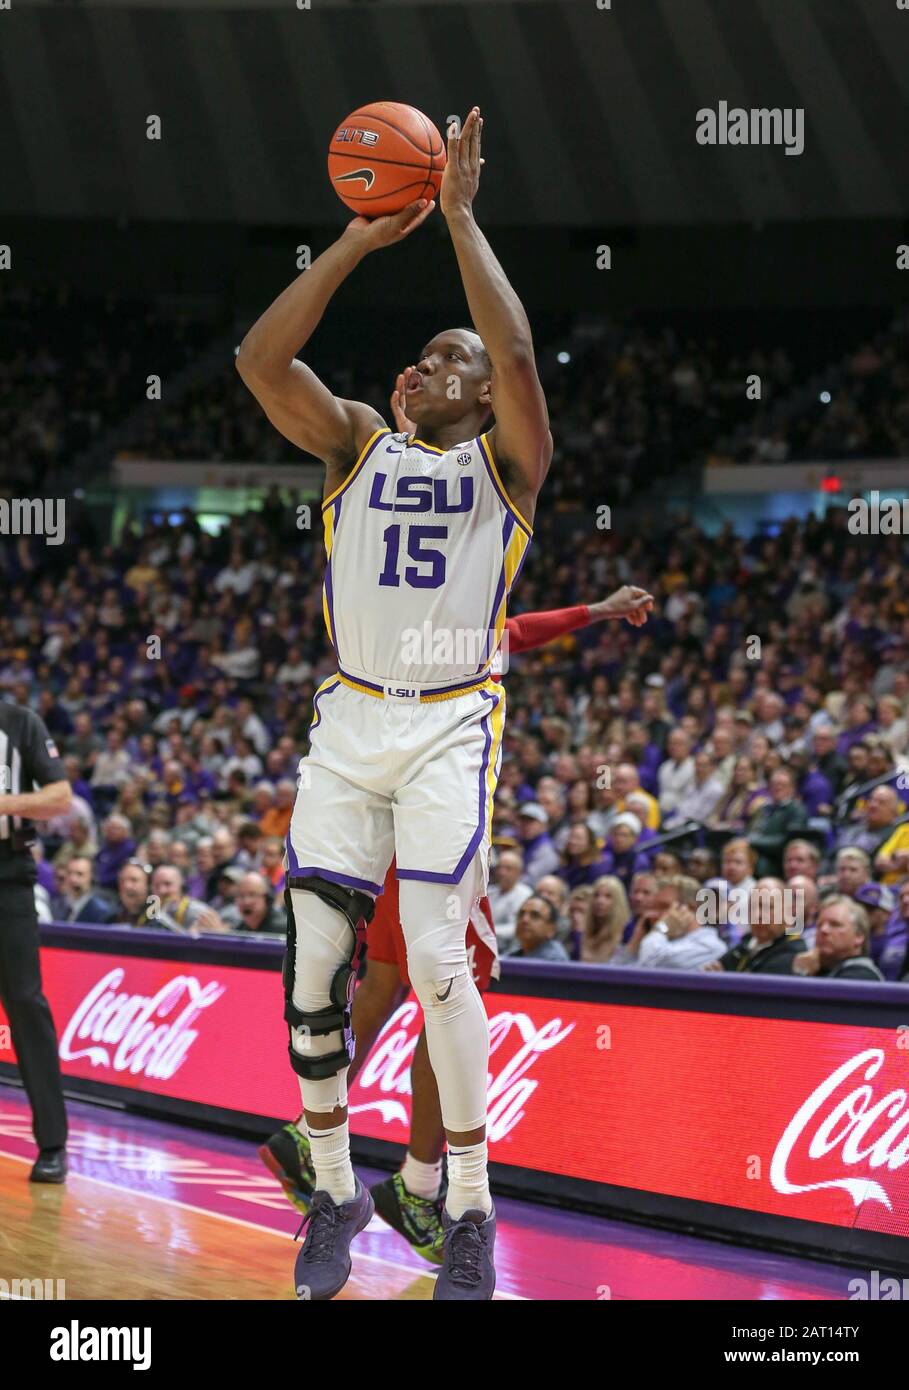 Baton Rouge, LA, USA. 29th Jan, 2020. Aundre Hyatt (15) puts up a three point shot for LSU during NCAA Basketball action between the Alabama Crimson Tide and the LSU Tigers at the Pete Maravich Assembly Center in Baton Rouge, LA. Jonathan Mailhes/CSM/Alamy Live News Stock Photo